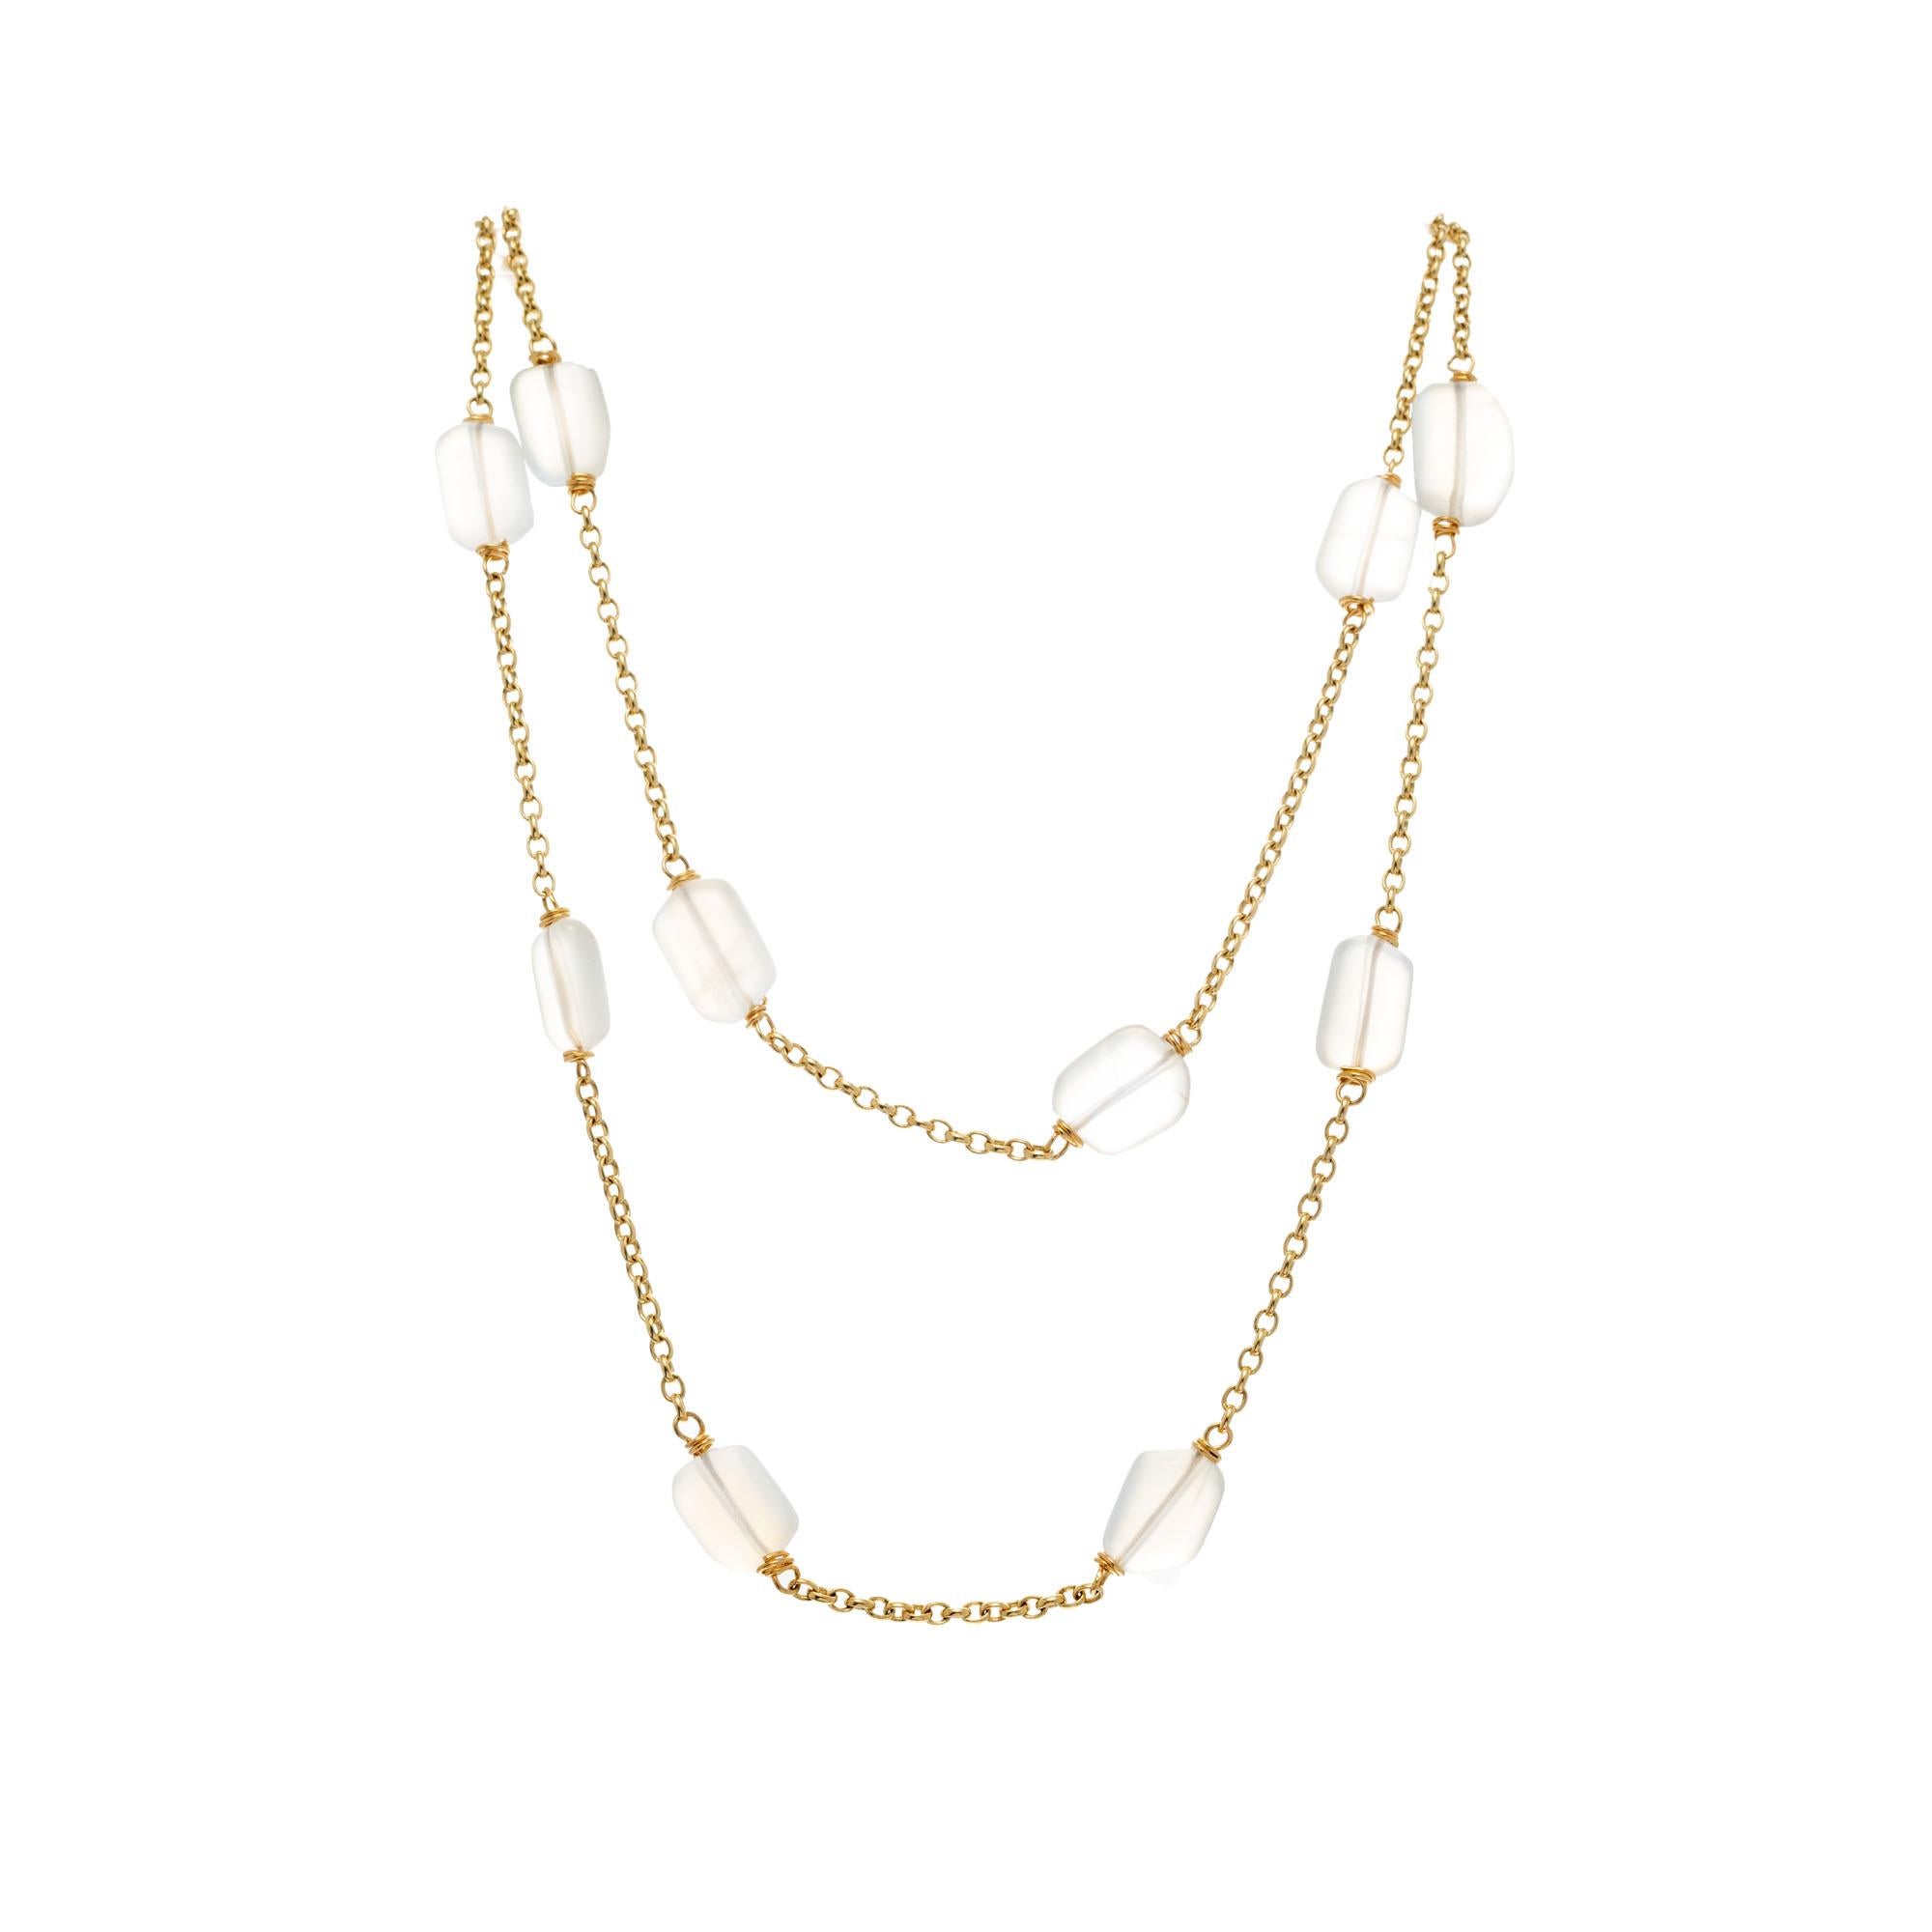 Solid 18k yellow gold link chain with 15 tumbled moonstones. Can be worn once or twice around the neck. 

15 elongated rectangular shaped white moonstone beads, approx. 100.00
18k yellow gold 
Stamped: 750 18k Italy
47.2 grams
Chain: 36 Inches 

